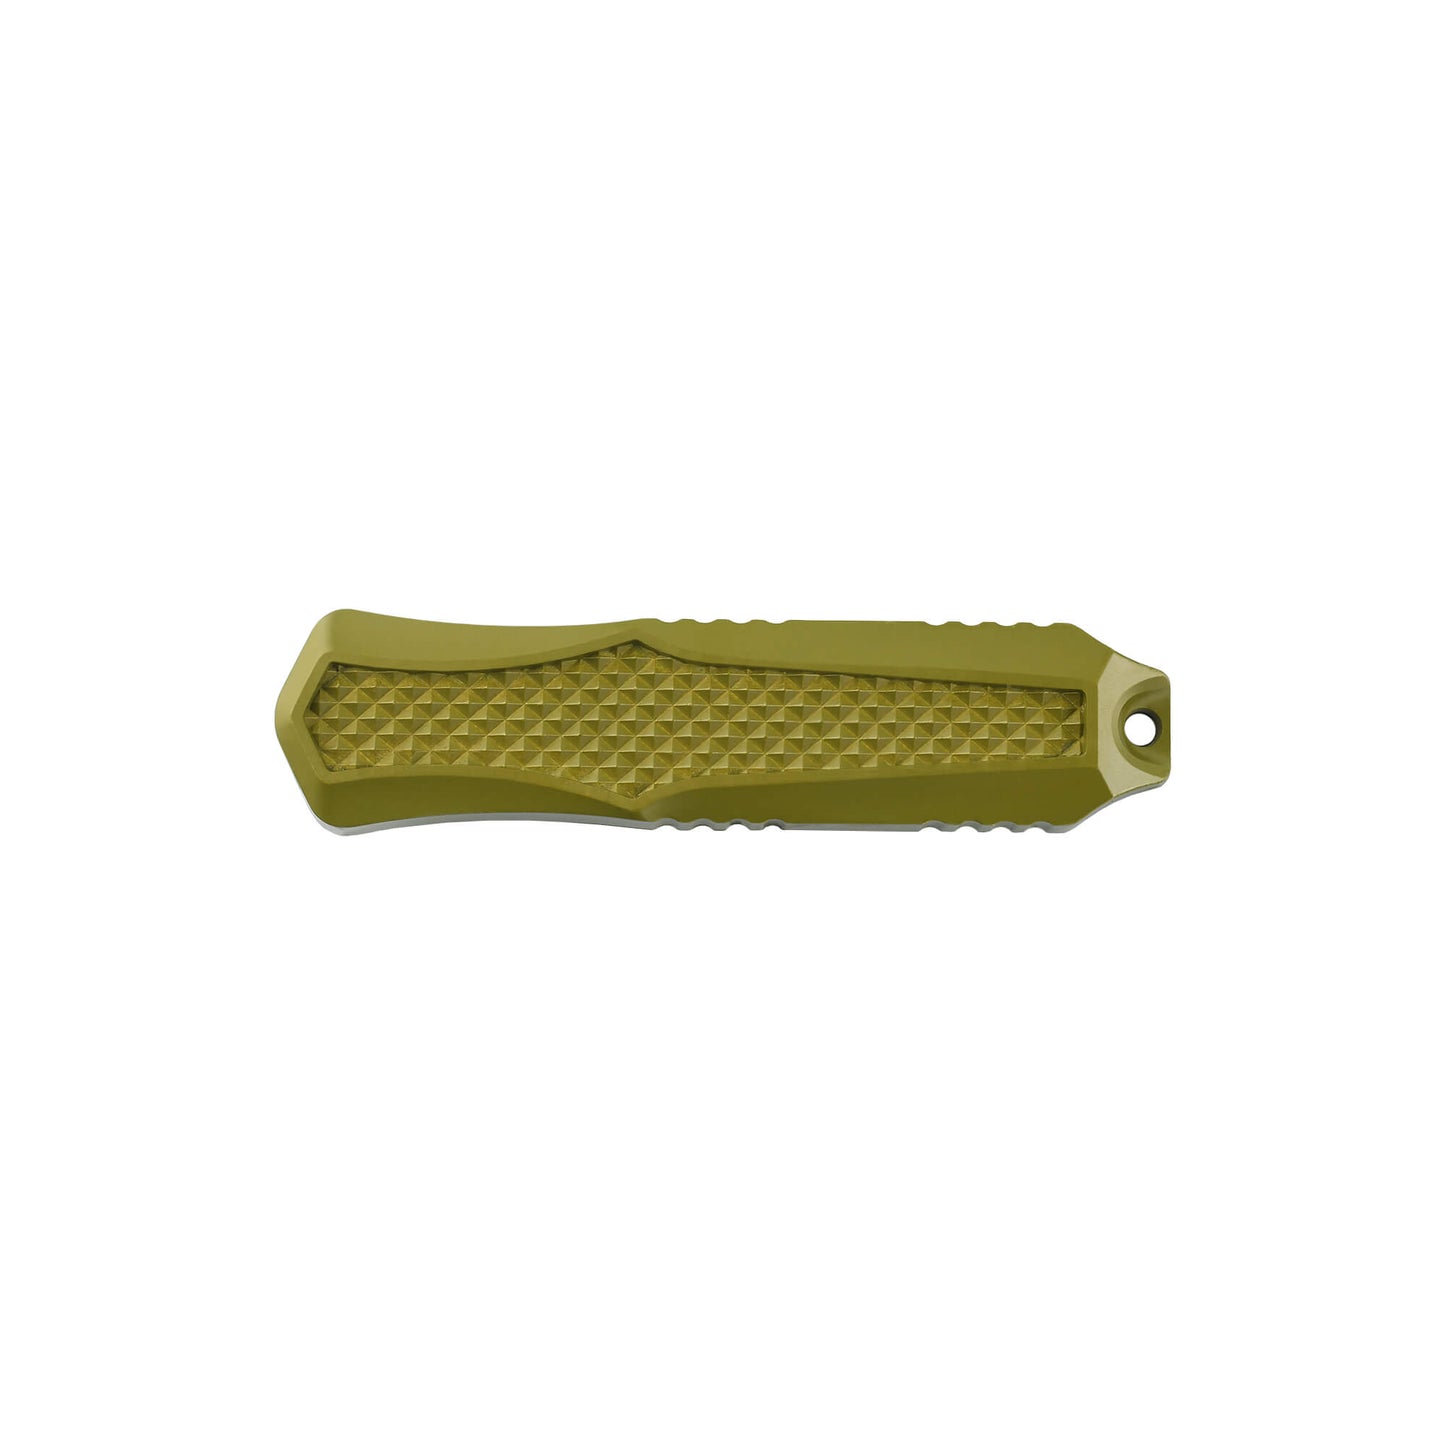 Green Automatic OTF knife Relik from Mavik Gear with spear point blade, Zinc alloy handle, button lock and lanyard hole.